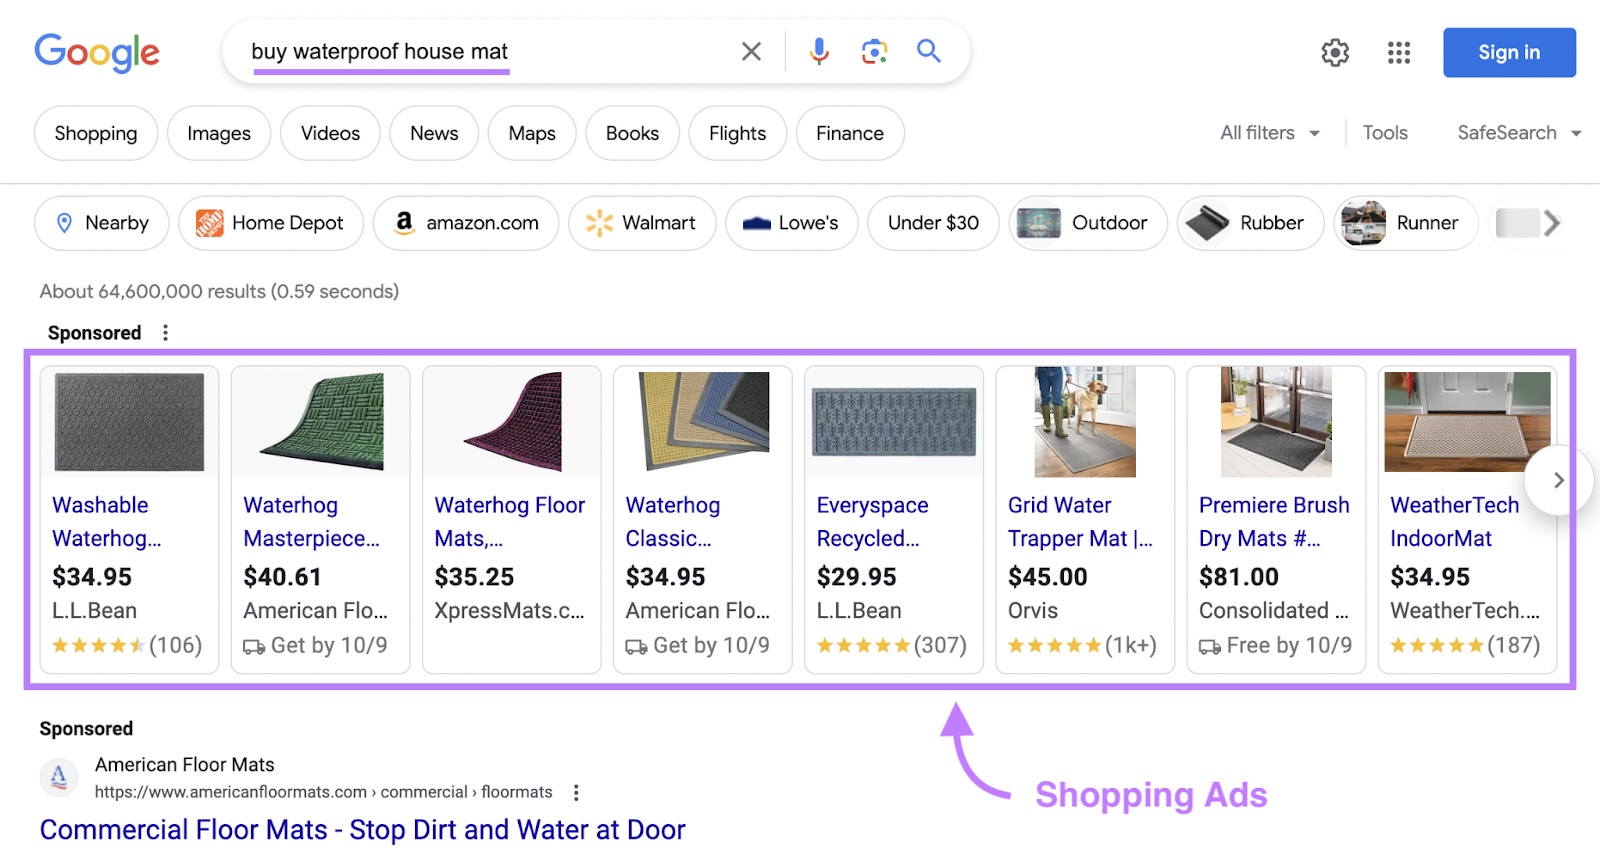 Google s،pping ads appearing for “buy waterproof ،use mat" query